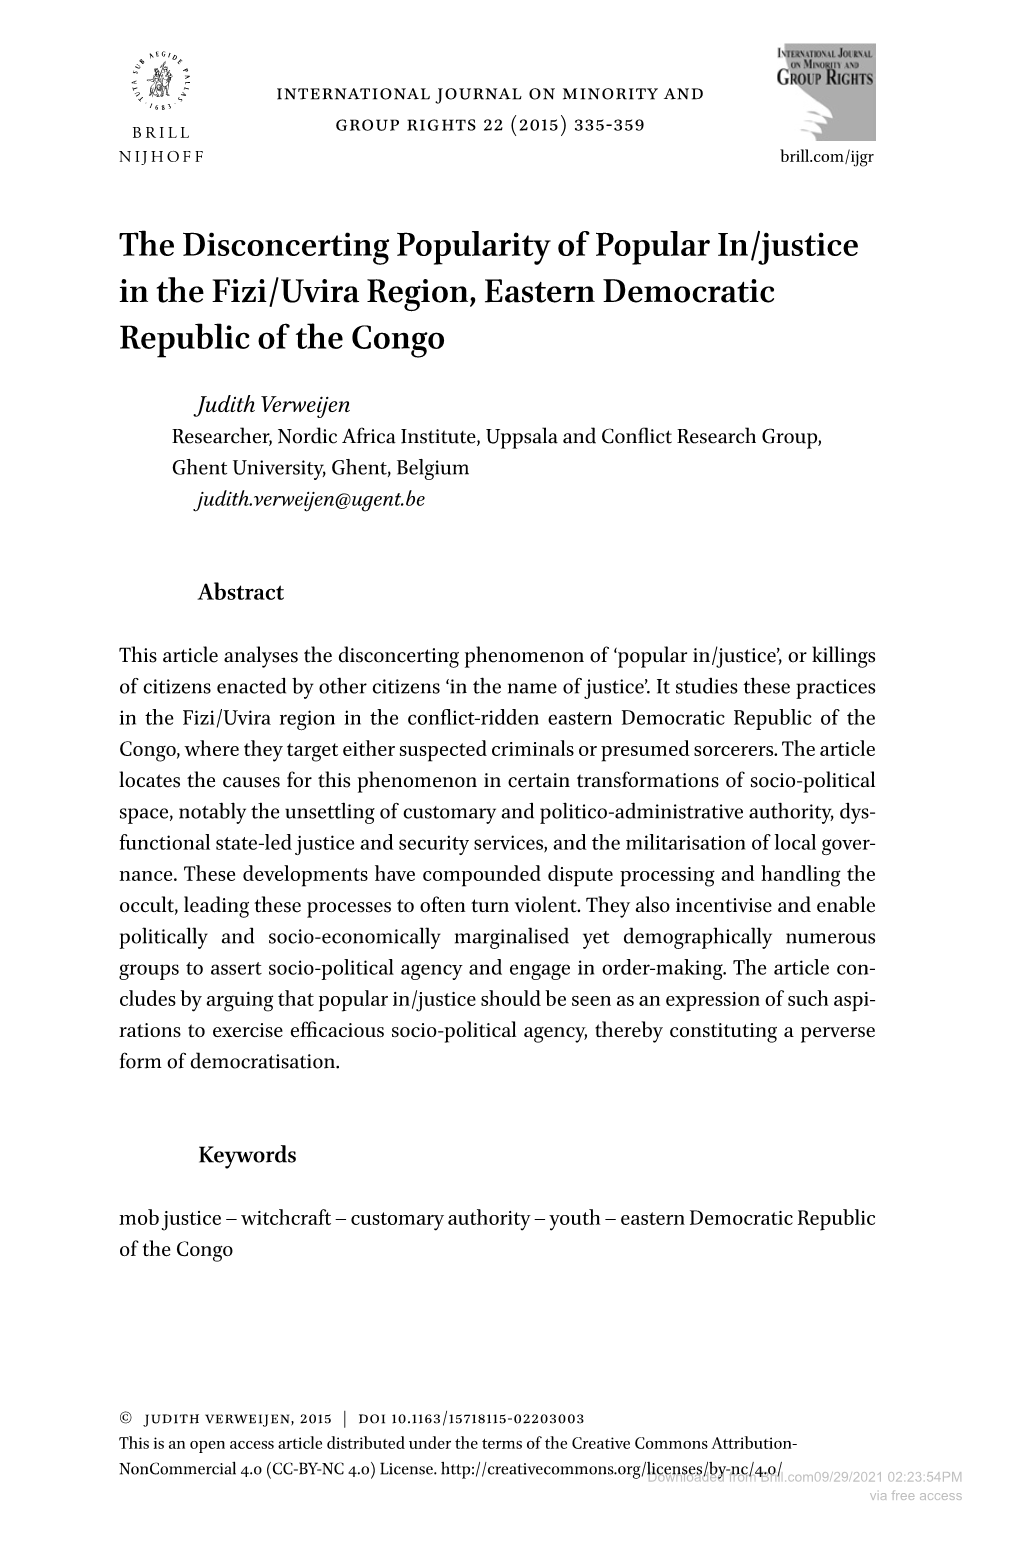 The Disconcerting Popularity of Popular In/Justice in the Fizi/Uvira Region, Eastern Democratic Republic of the Congo